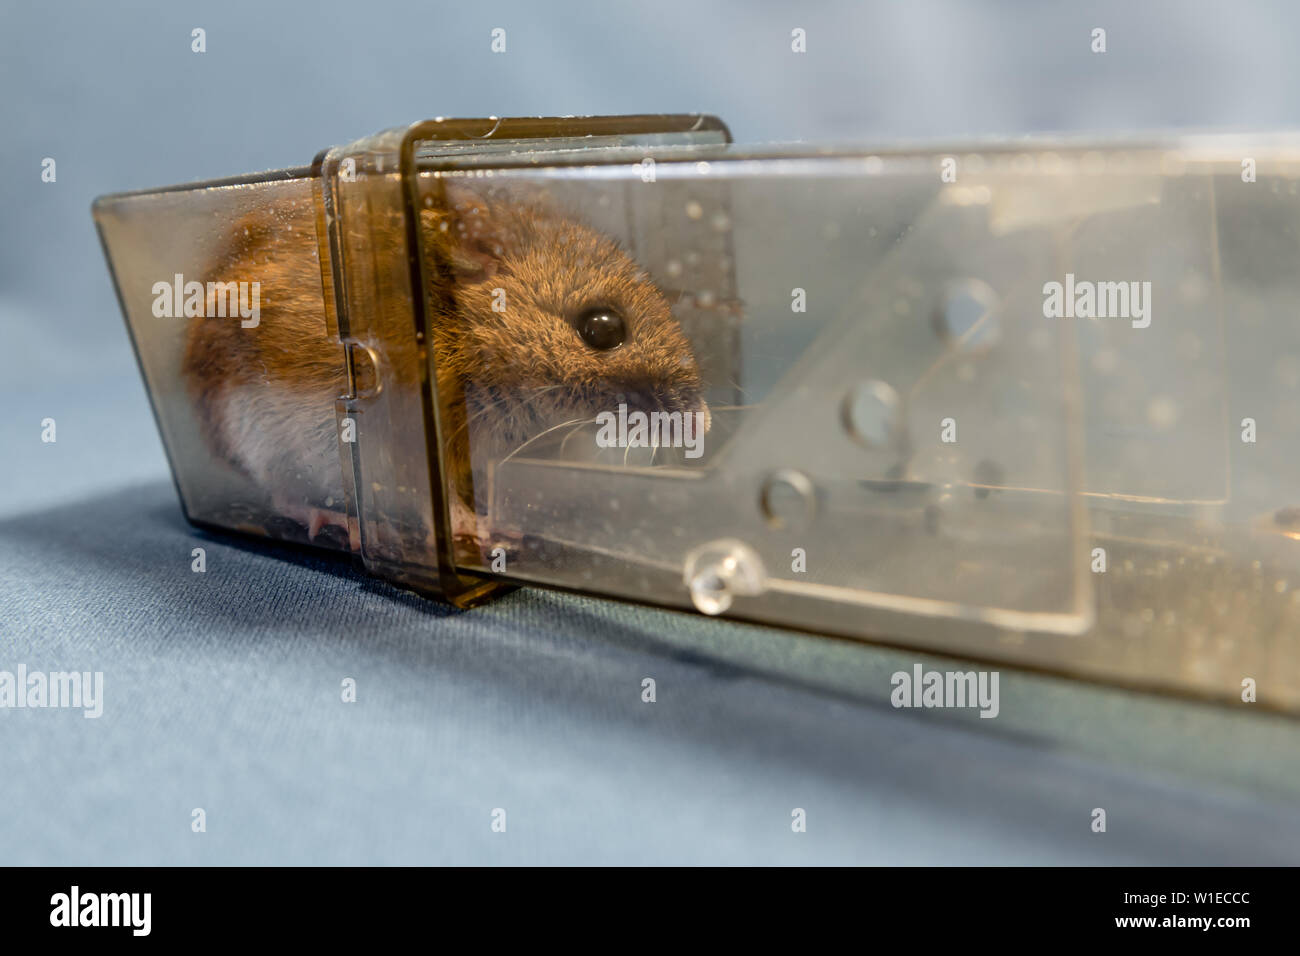 https://c8.alamy.com/comp/W1ECCC/a-wood-mouse-or-field-mouse-captured-in-a-humane-live-capture-no-kill-mouse-trap-W1ECCC.jpg